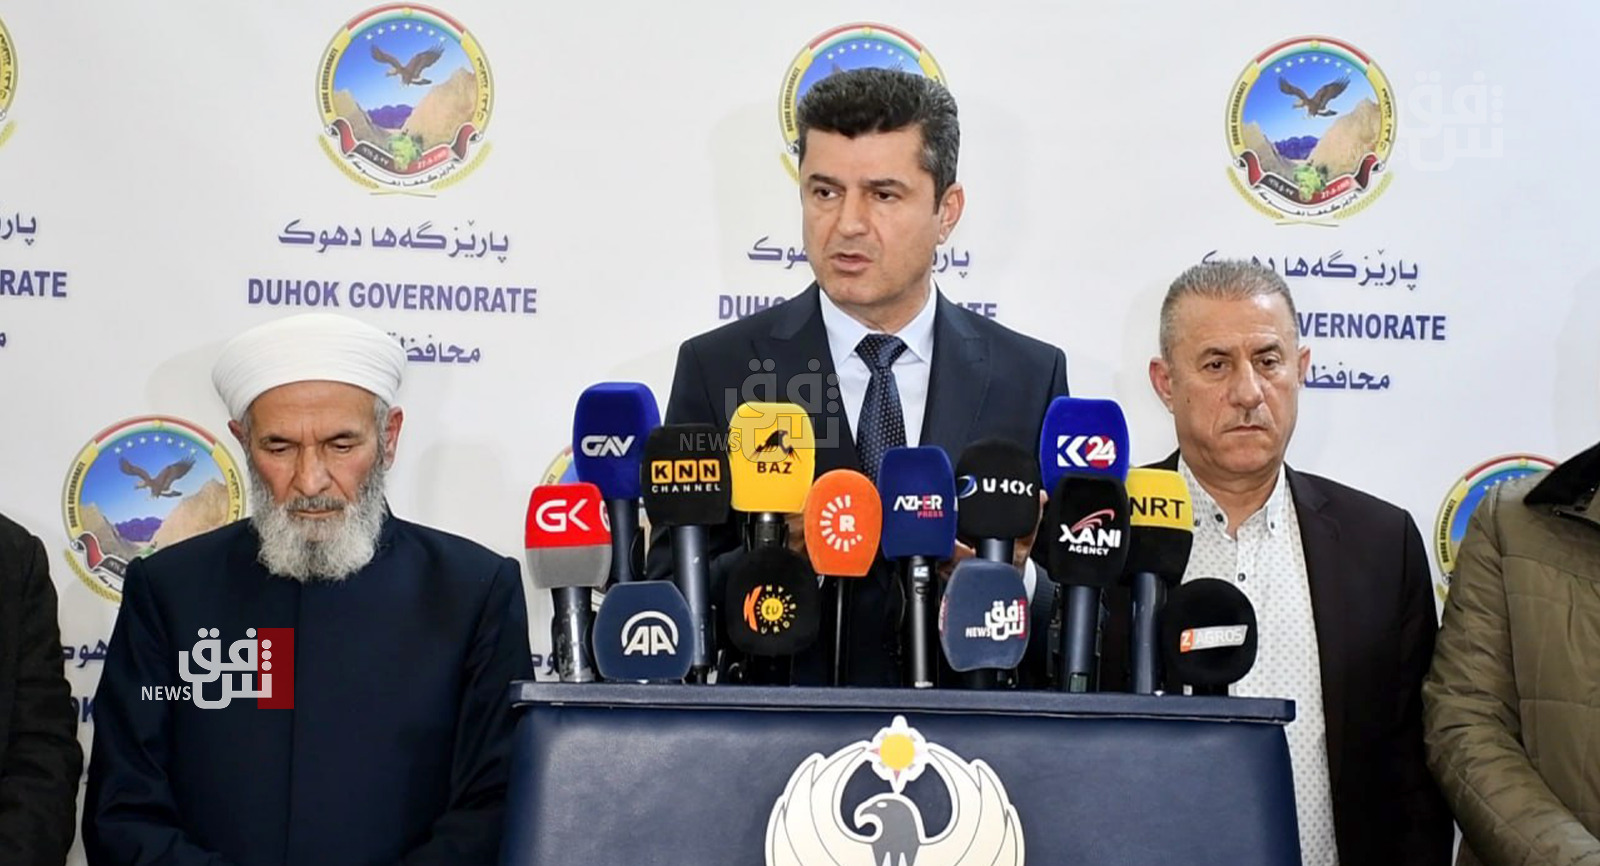 Governor: the Iraqi government did not provide aid after floods